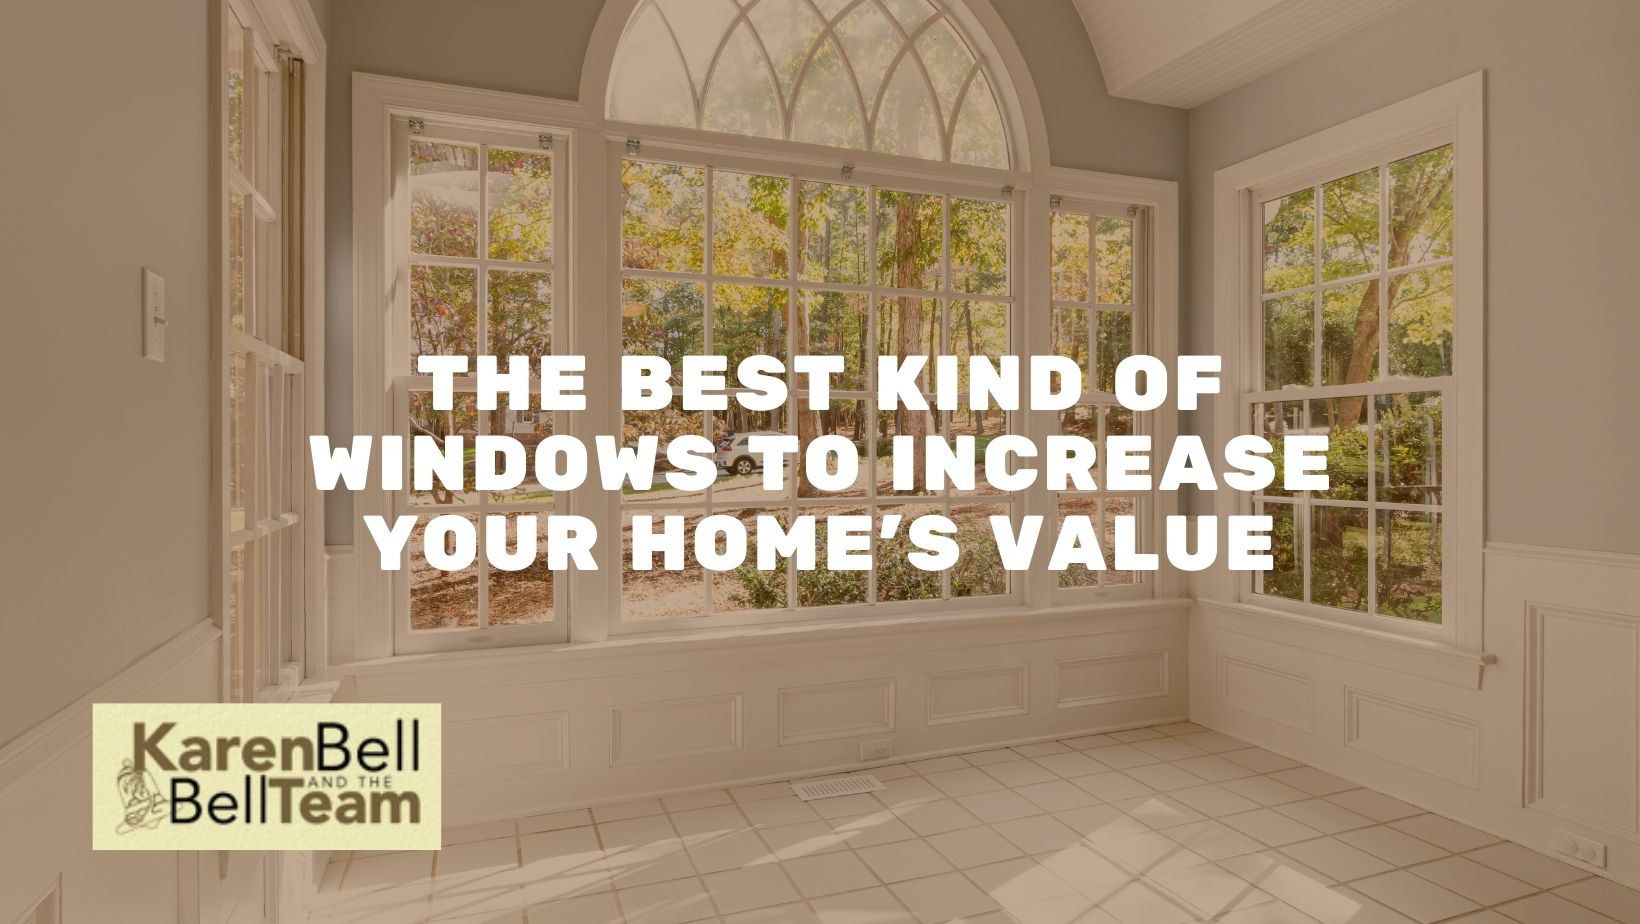 The Best Kind of Windows to Increase Your Home's Value